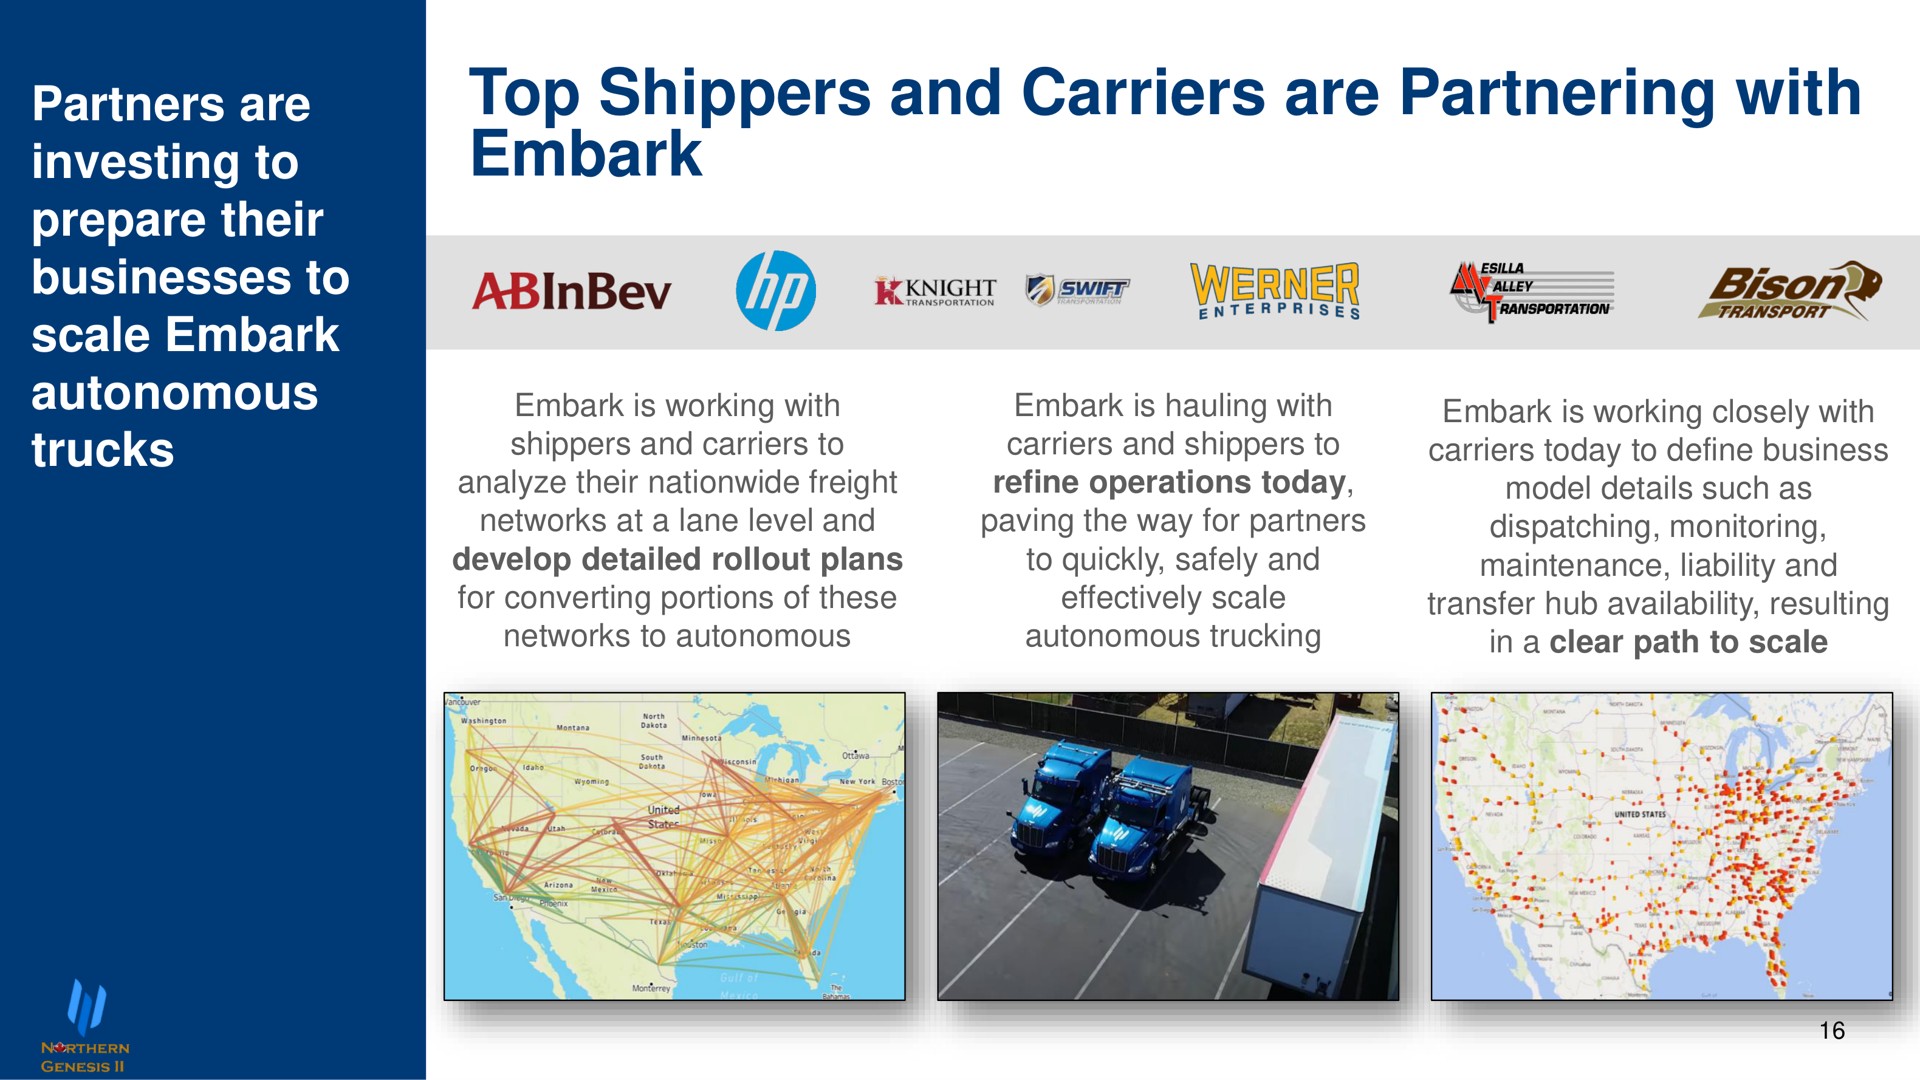 top shippers and carriers are partnering with embark | Embark